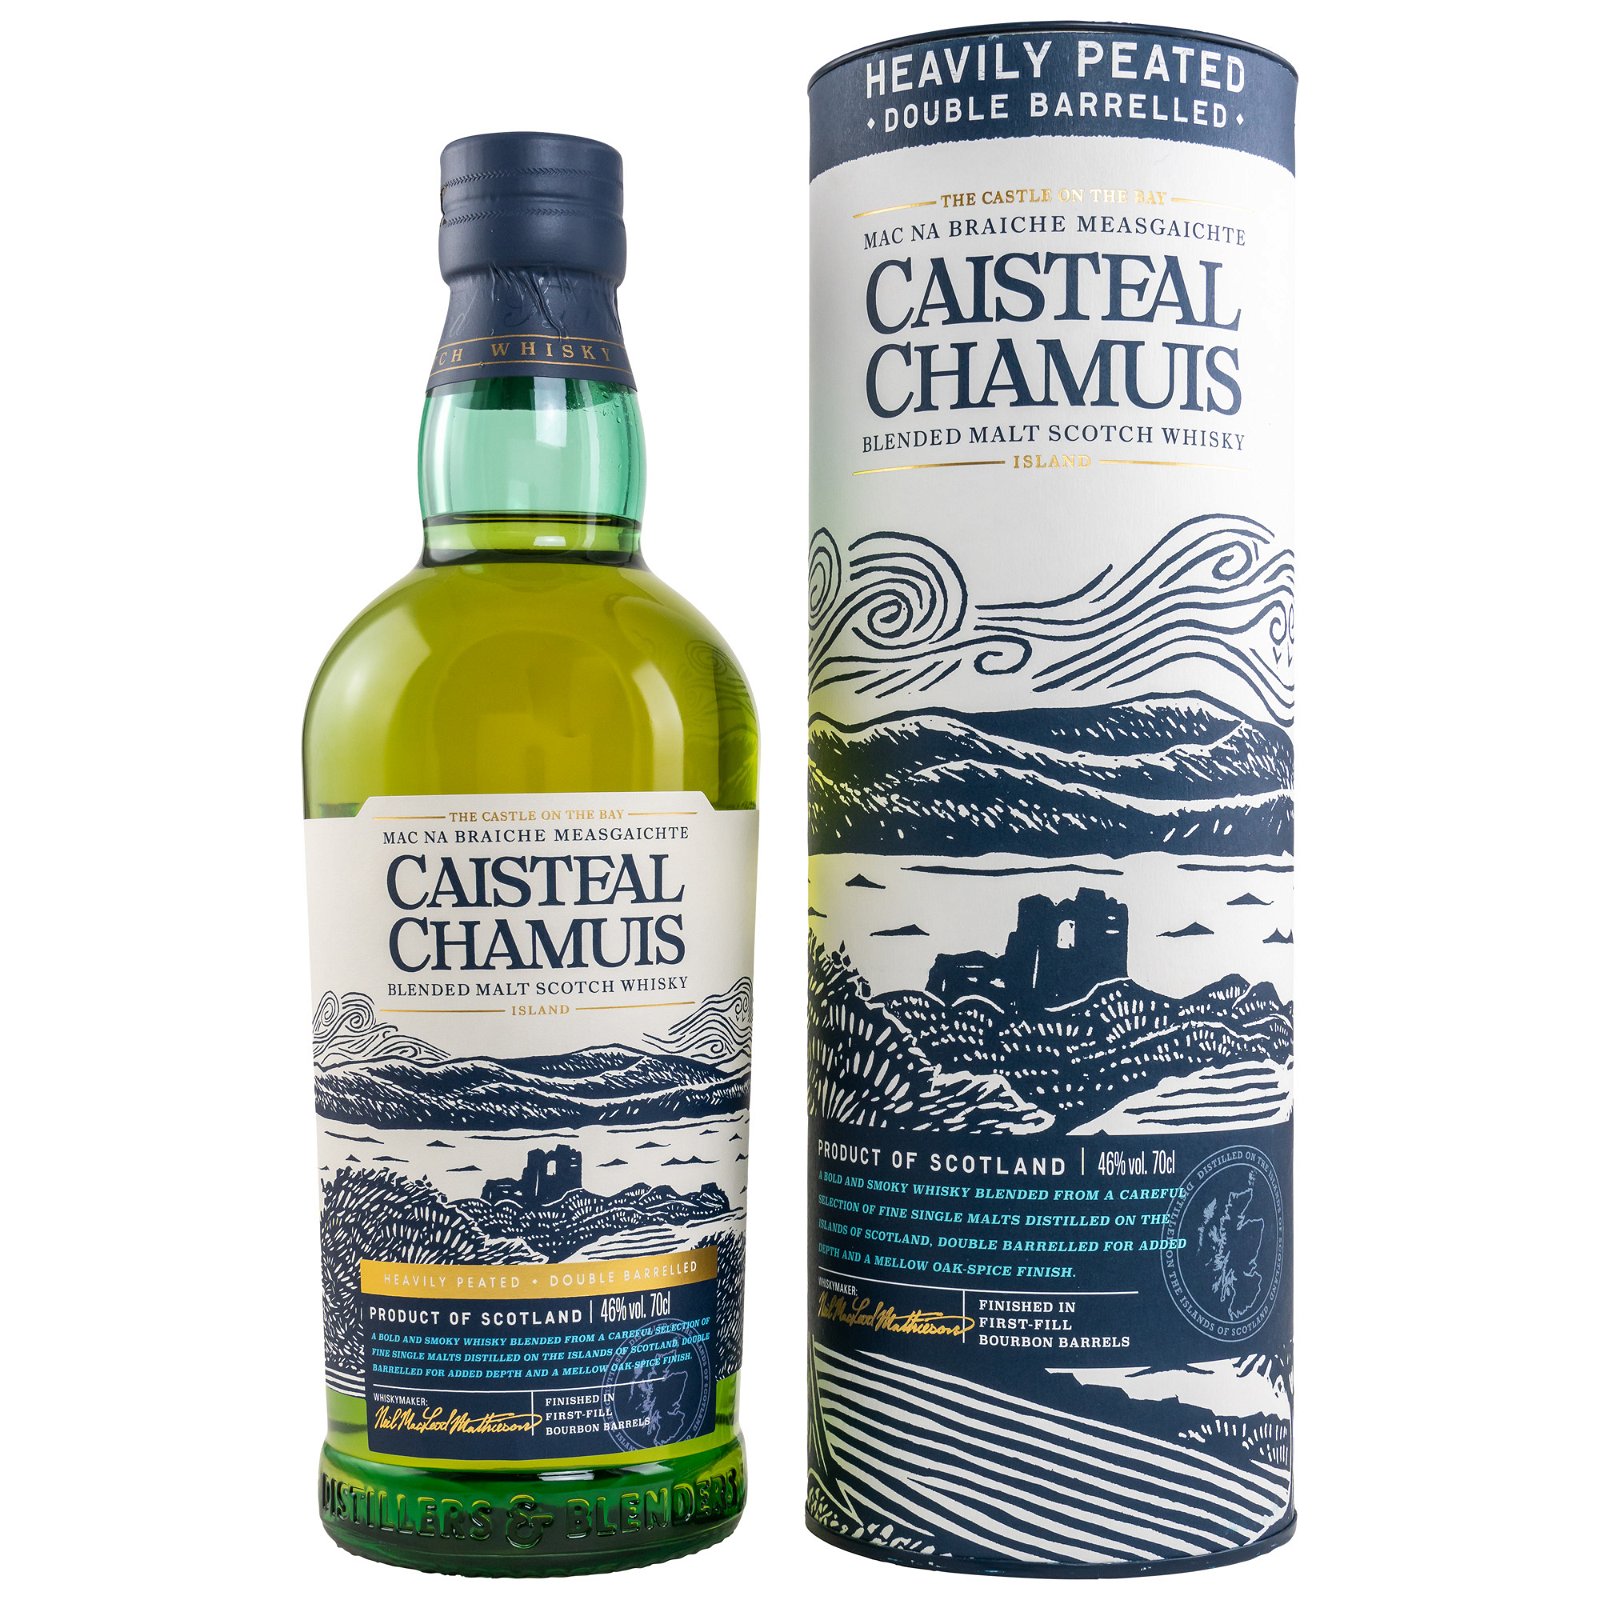 Caisteal Chamuis First-Fill Bourbon Barrel Finish Heavily Peated Blended Malt Whisky